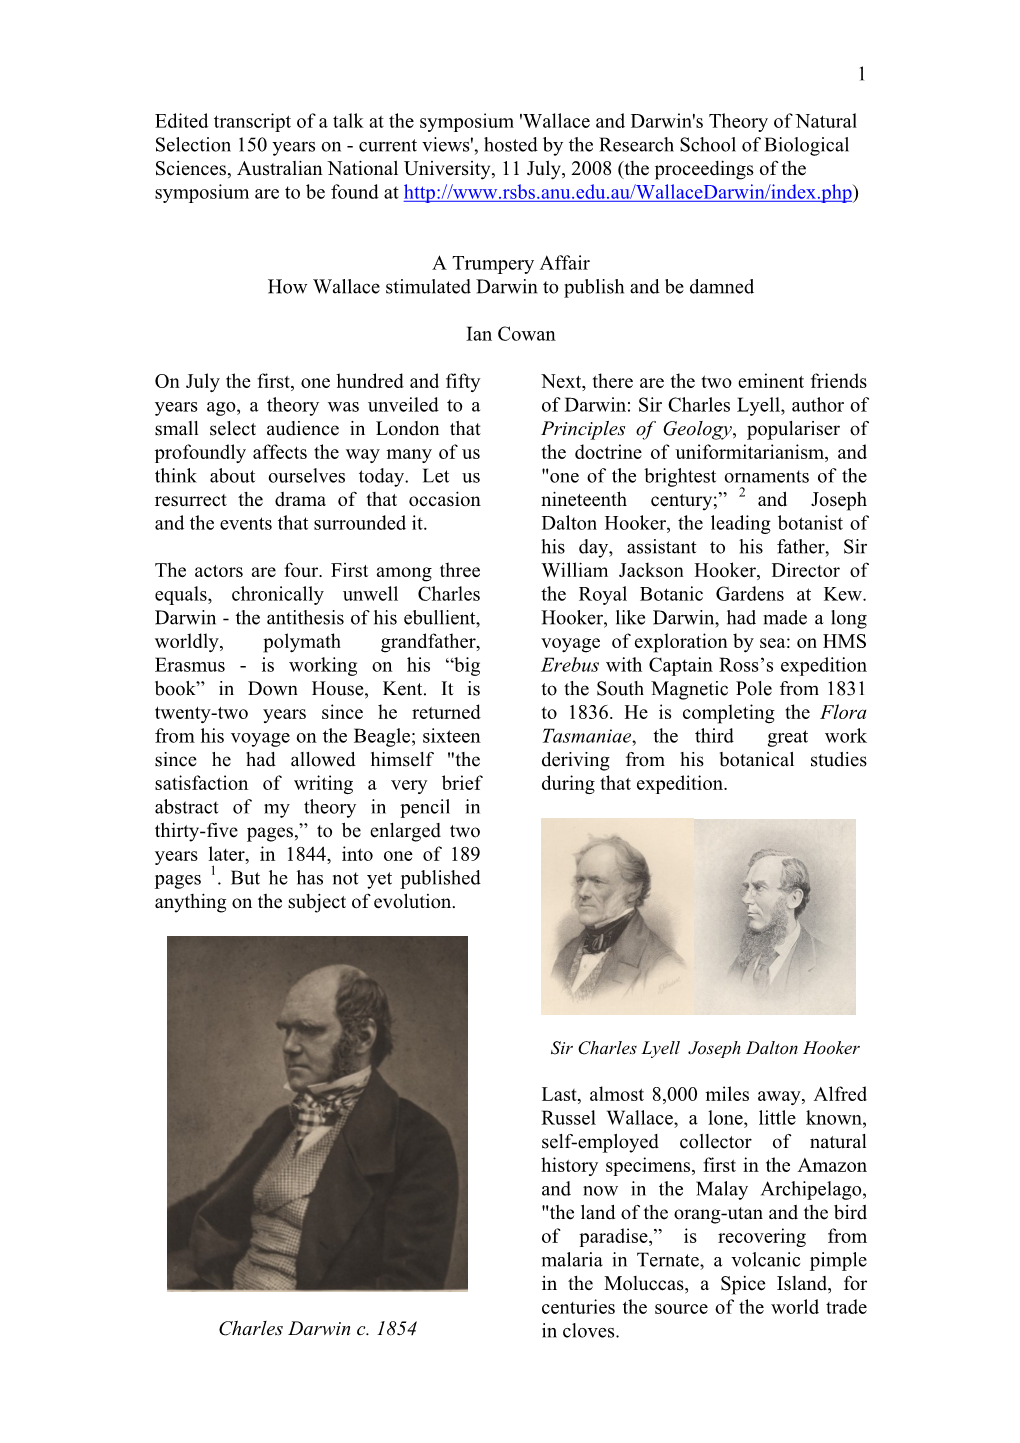 1 Edited Transcript of a Talk at the Symposium 'Wallace and Darwin's Theory of Natural Selection 150 Years On